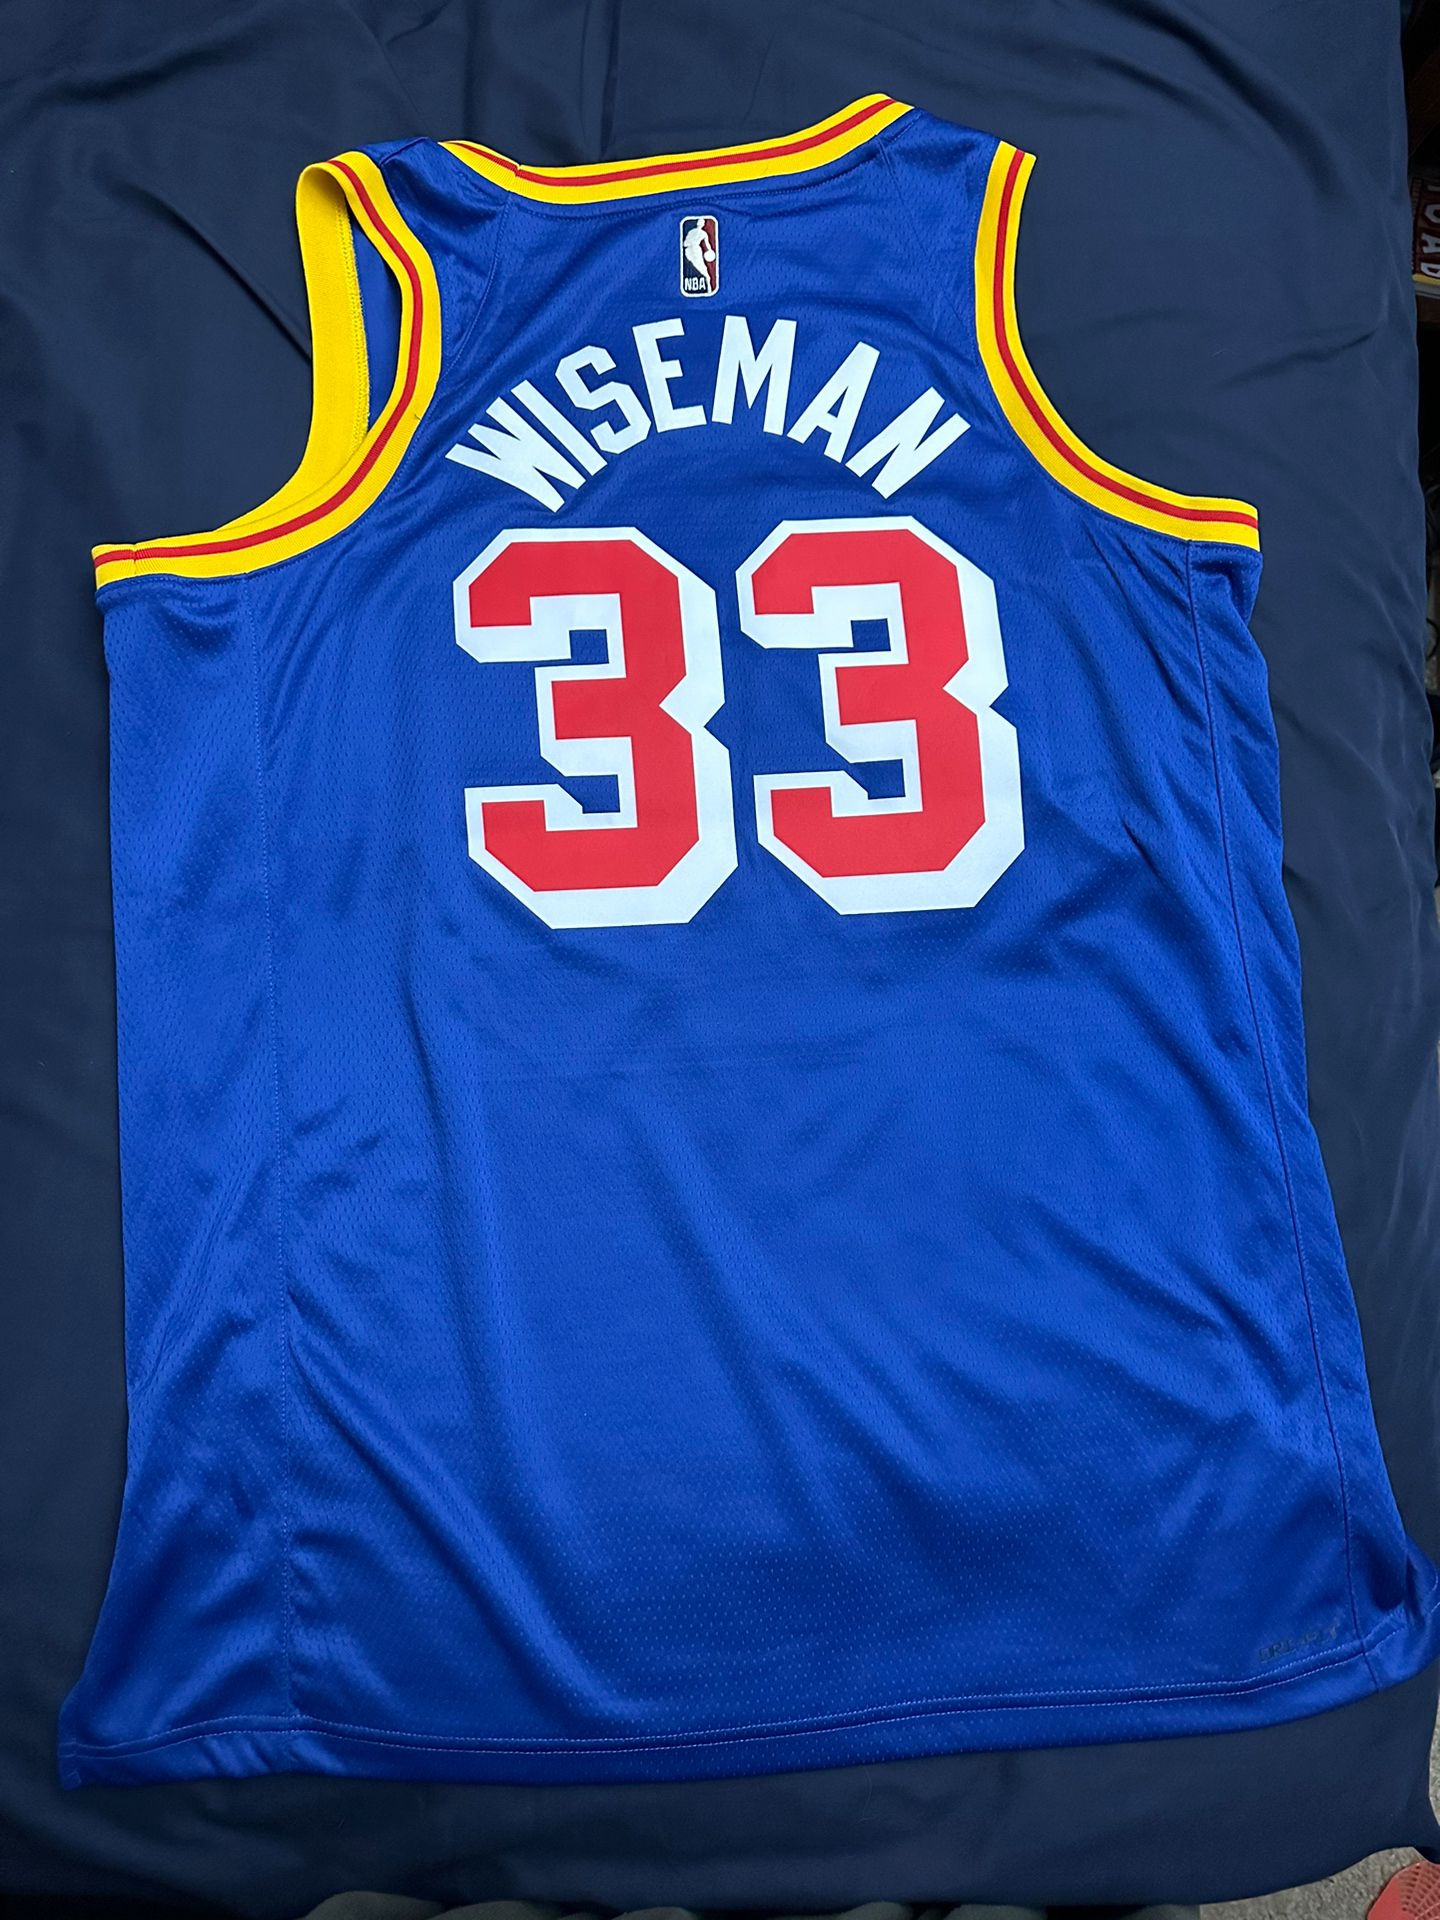 Golden State Warriors James Wiseman Jersey for Sale in Ceres, CA - OfferUp